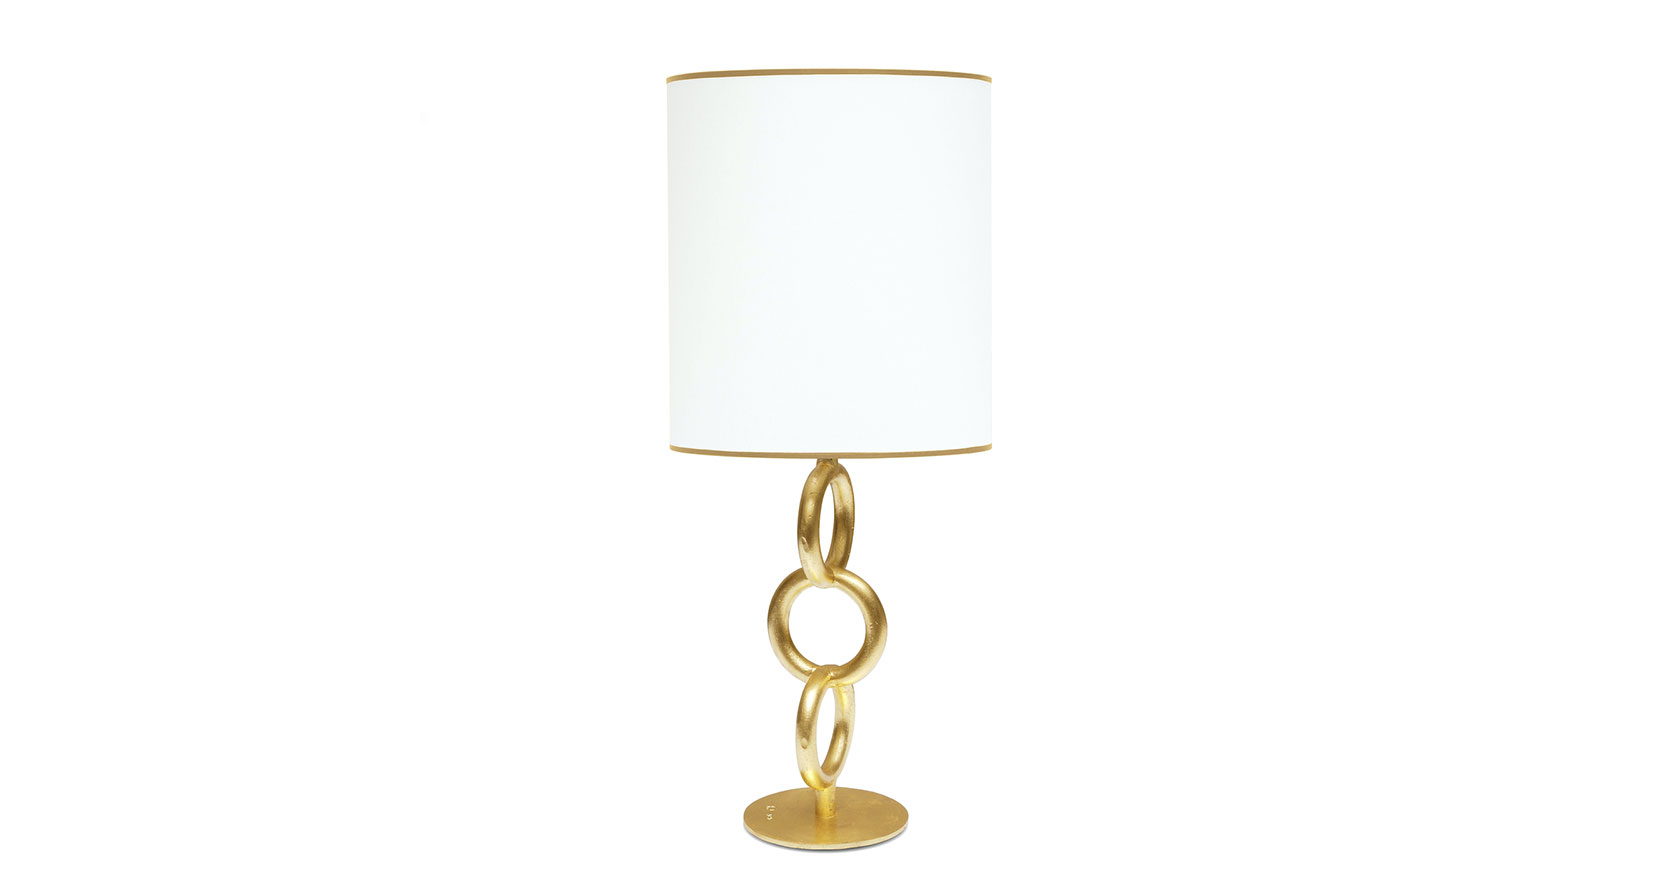 Christian Ghion, lamp in gold wrought iron, 3 rings on a circular base, cylindric white lamp shade with a gold trim top and bottom